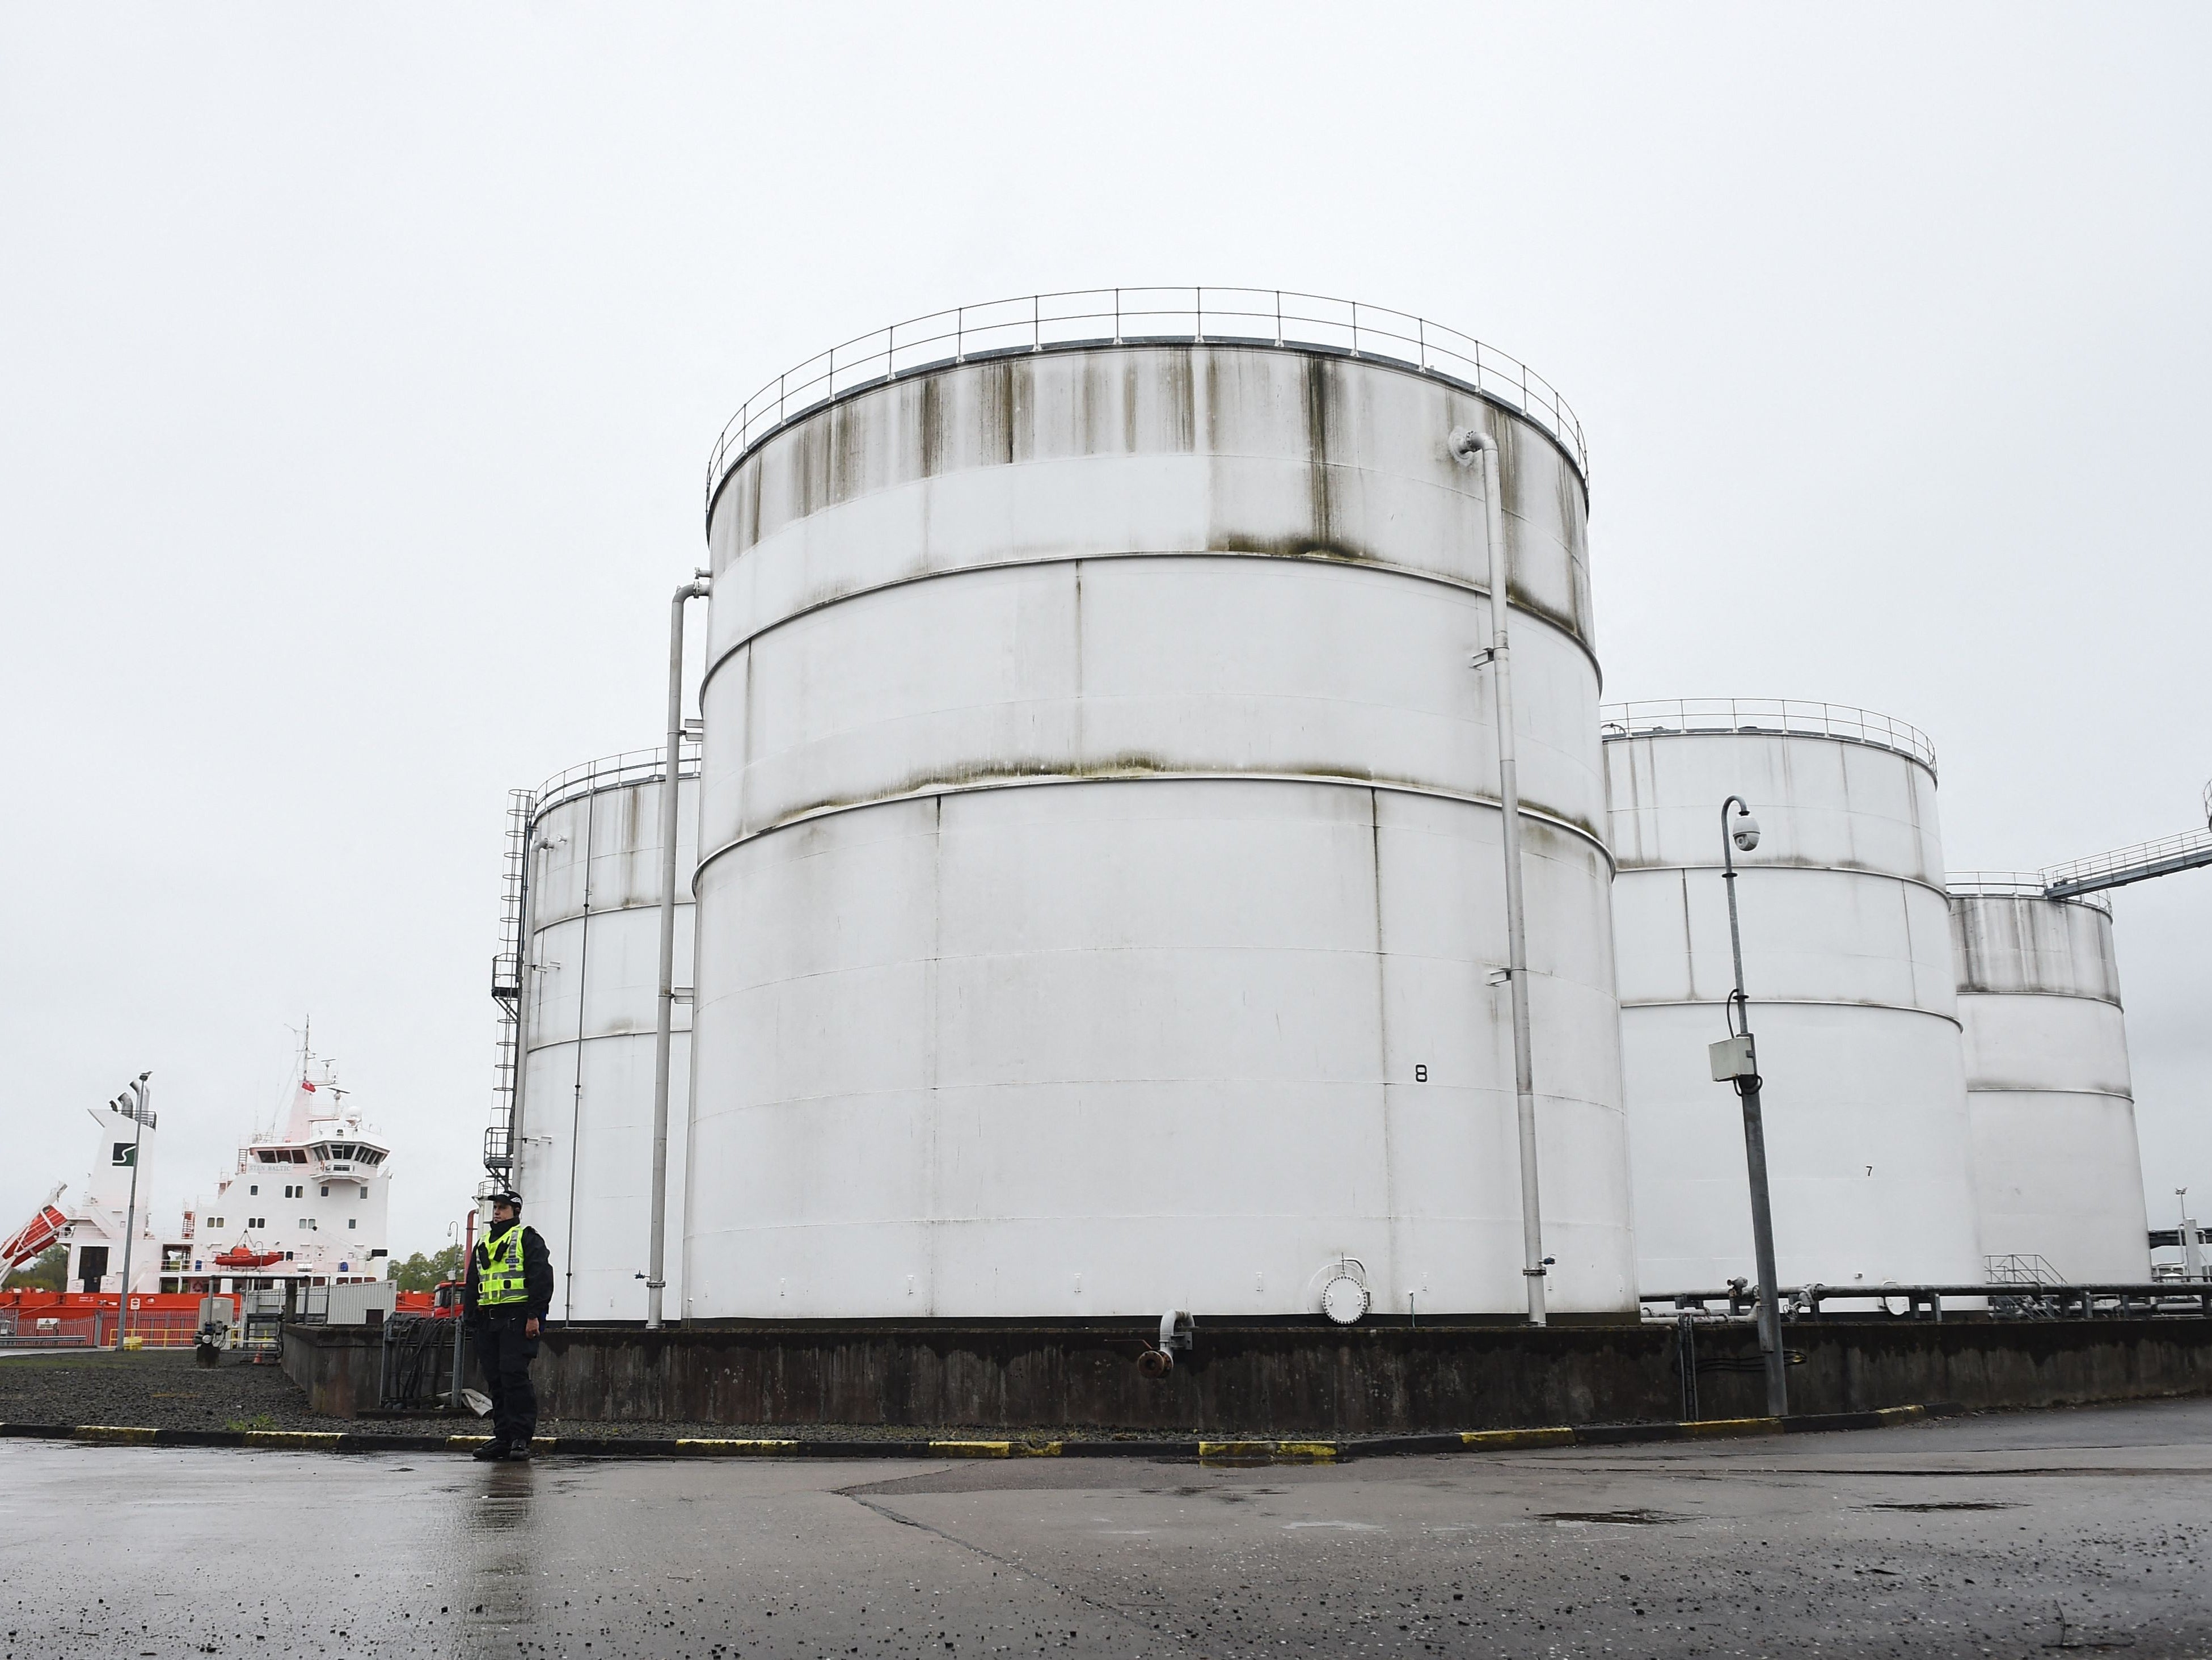 Climate activists have recently been targeting oil depots